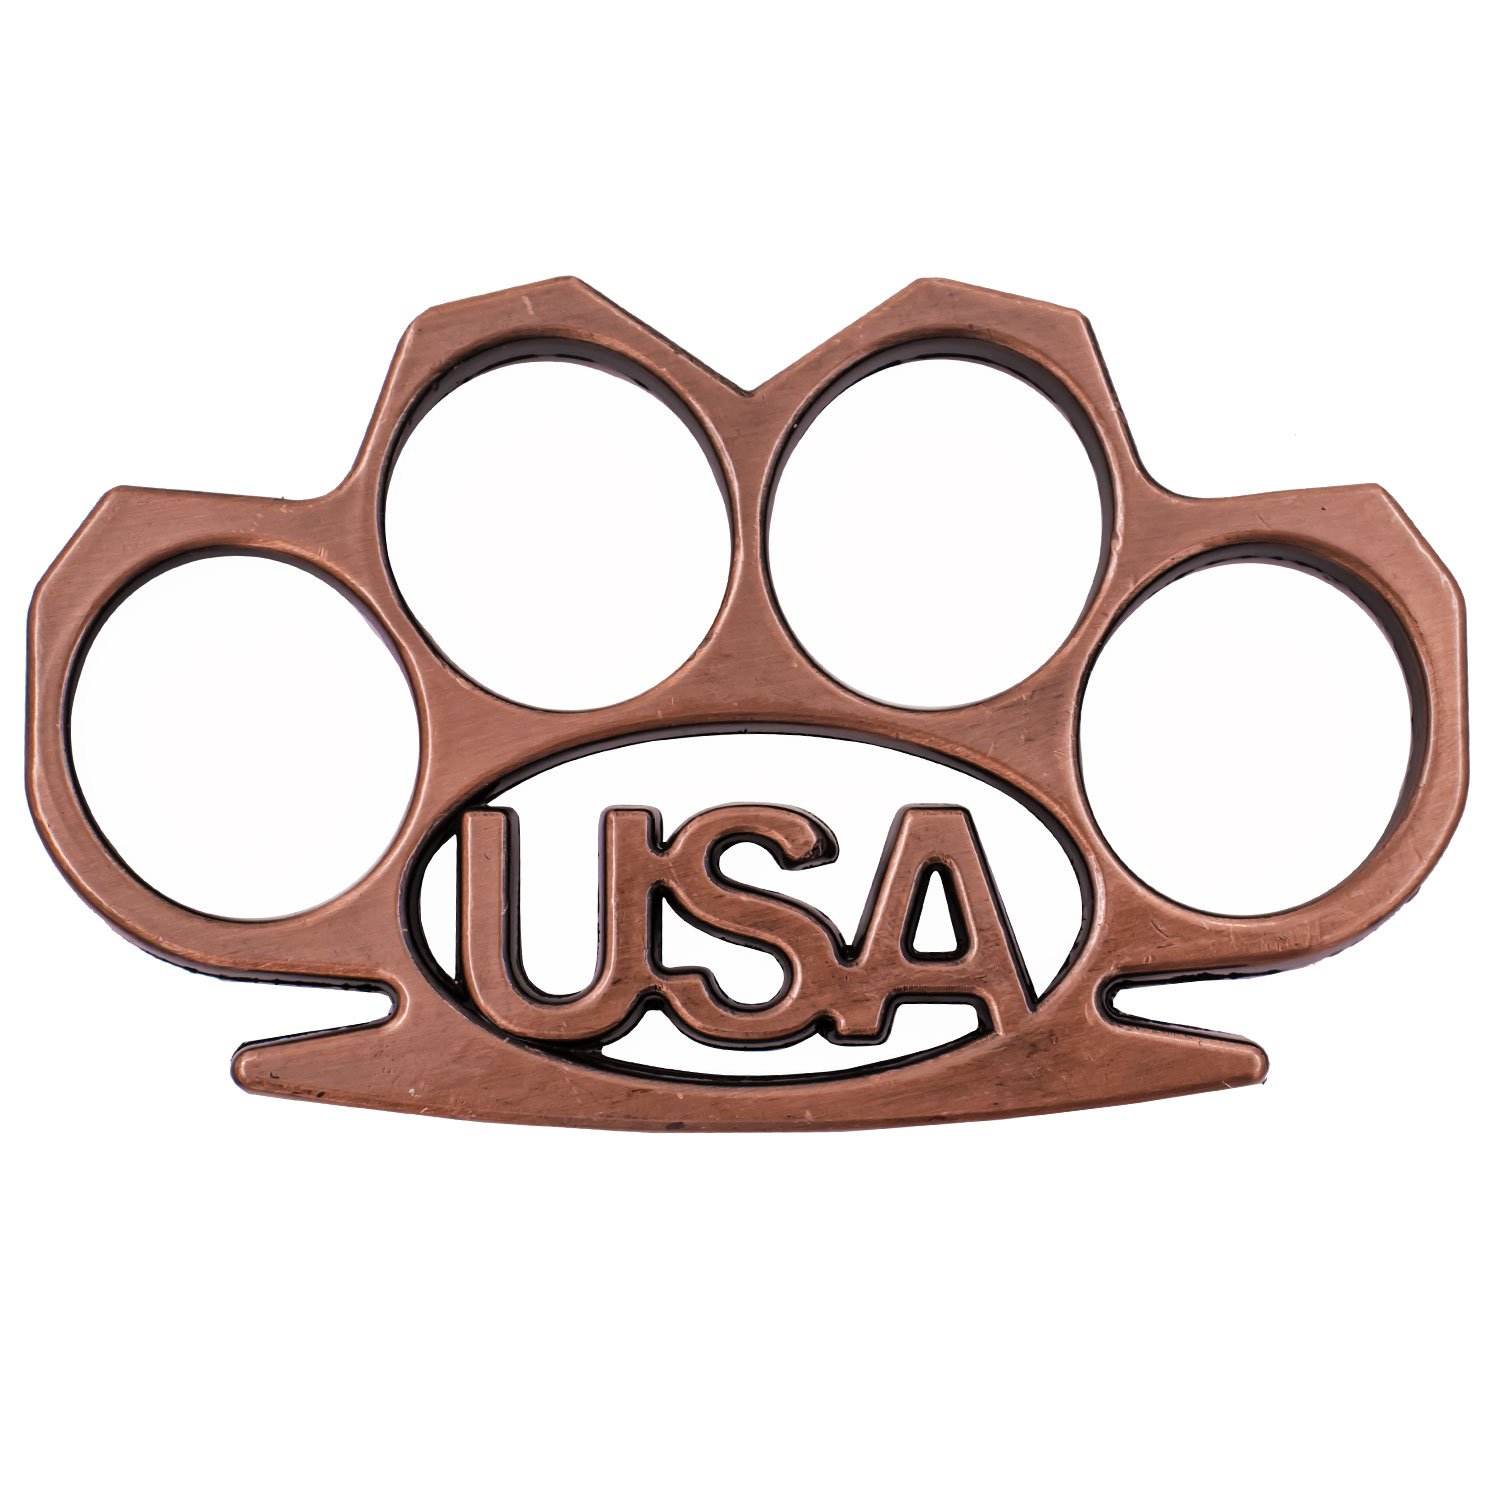 USA Brass Knuckles Copper Finish